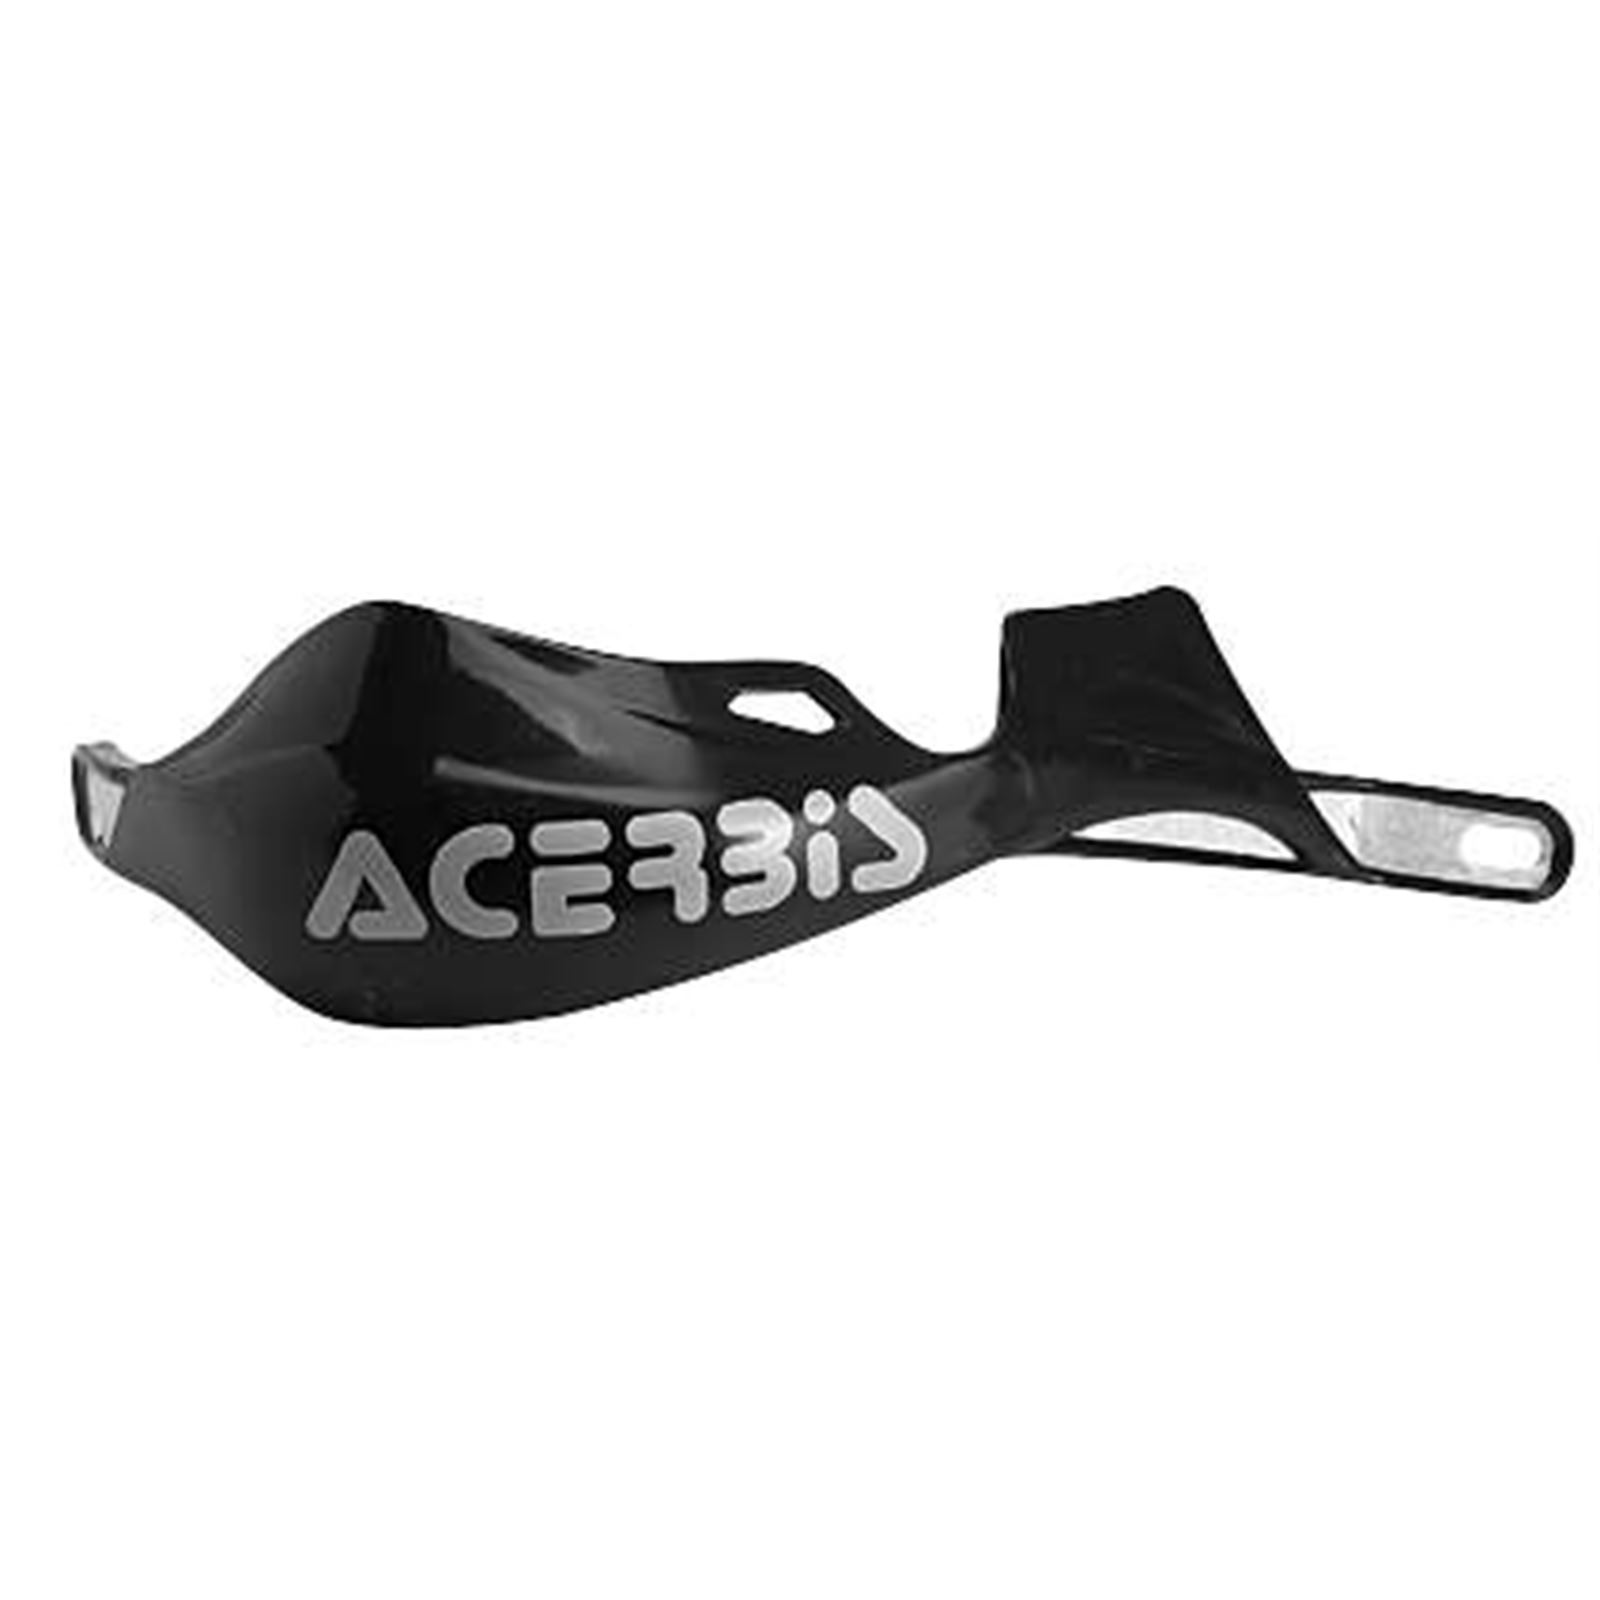 Acerbis Rally Pro Replacement Guards